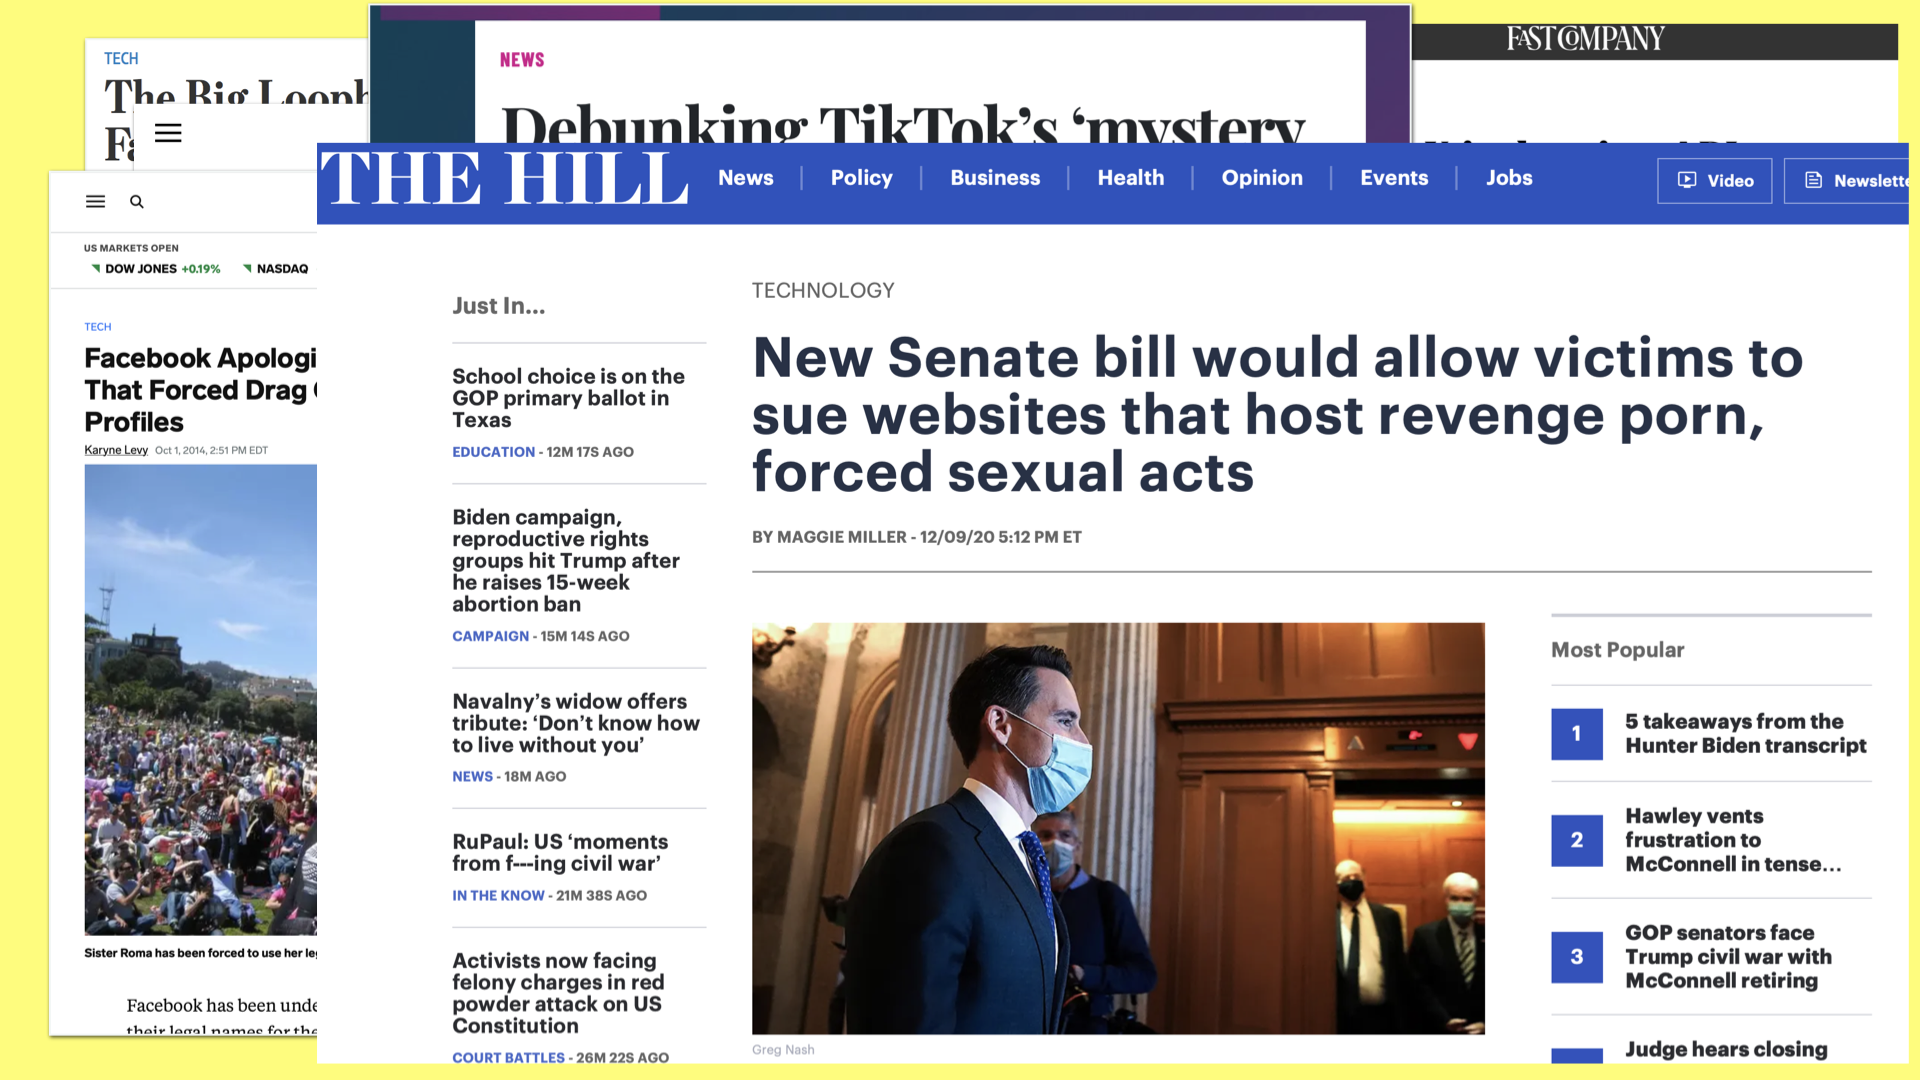 New Senate bill would allow victims to sue websites that host revenge porn, forced sexual acts